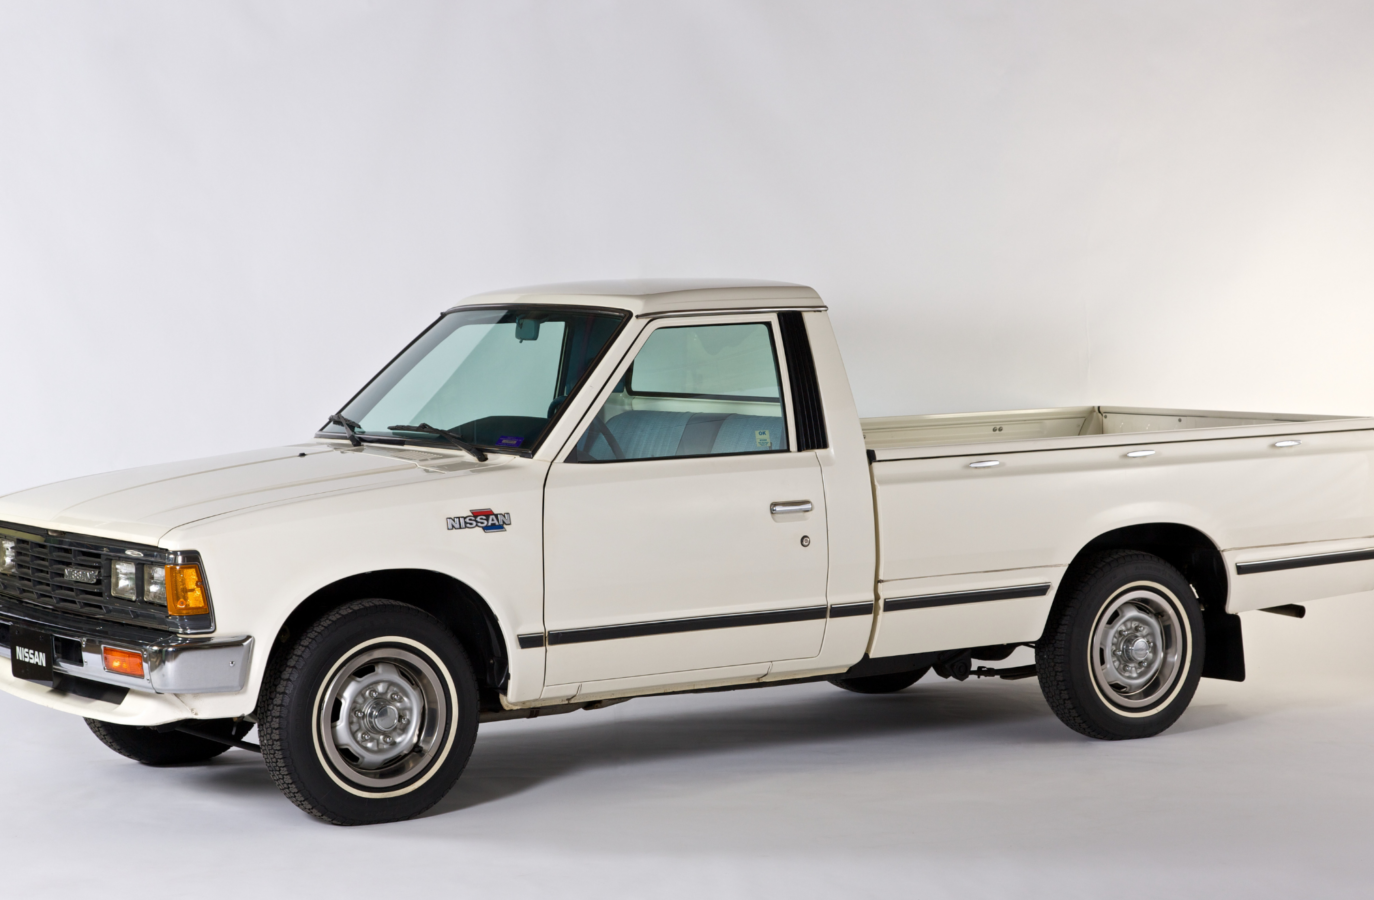 The first Nissan vehicle, a white pickup truck, manufactured in the United States is on display against a white backdrop